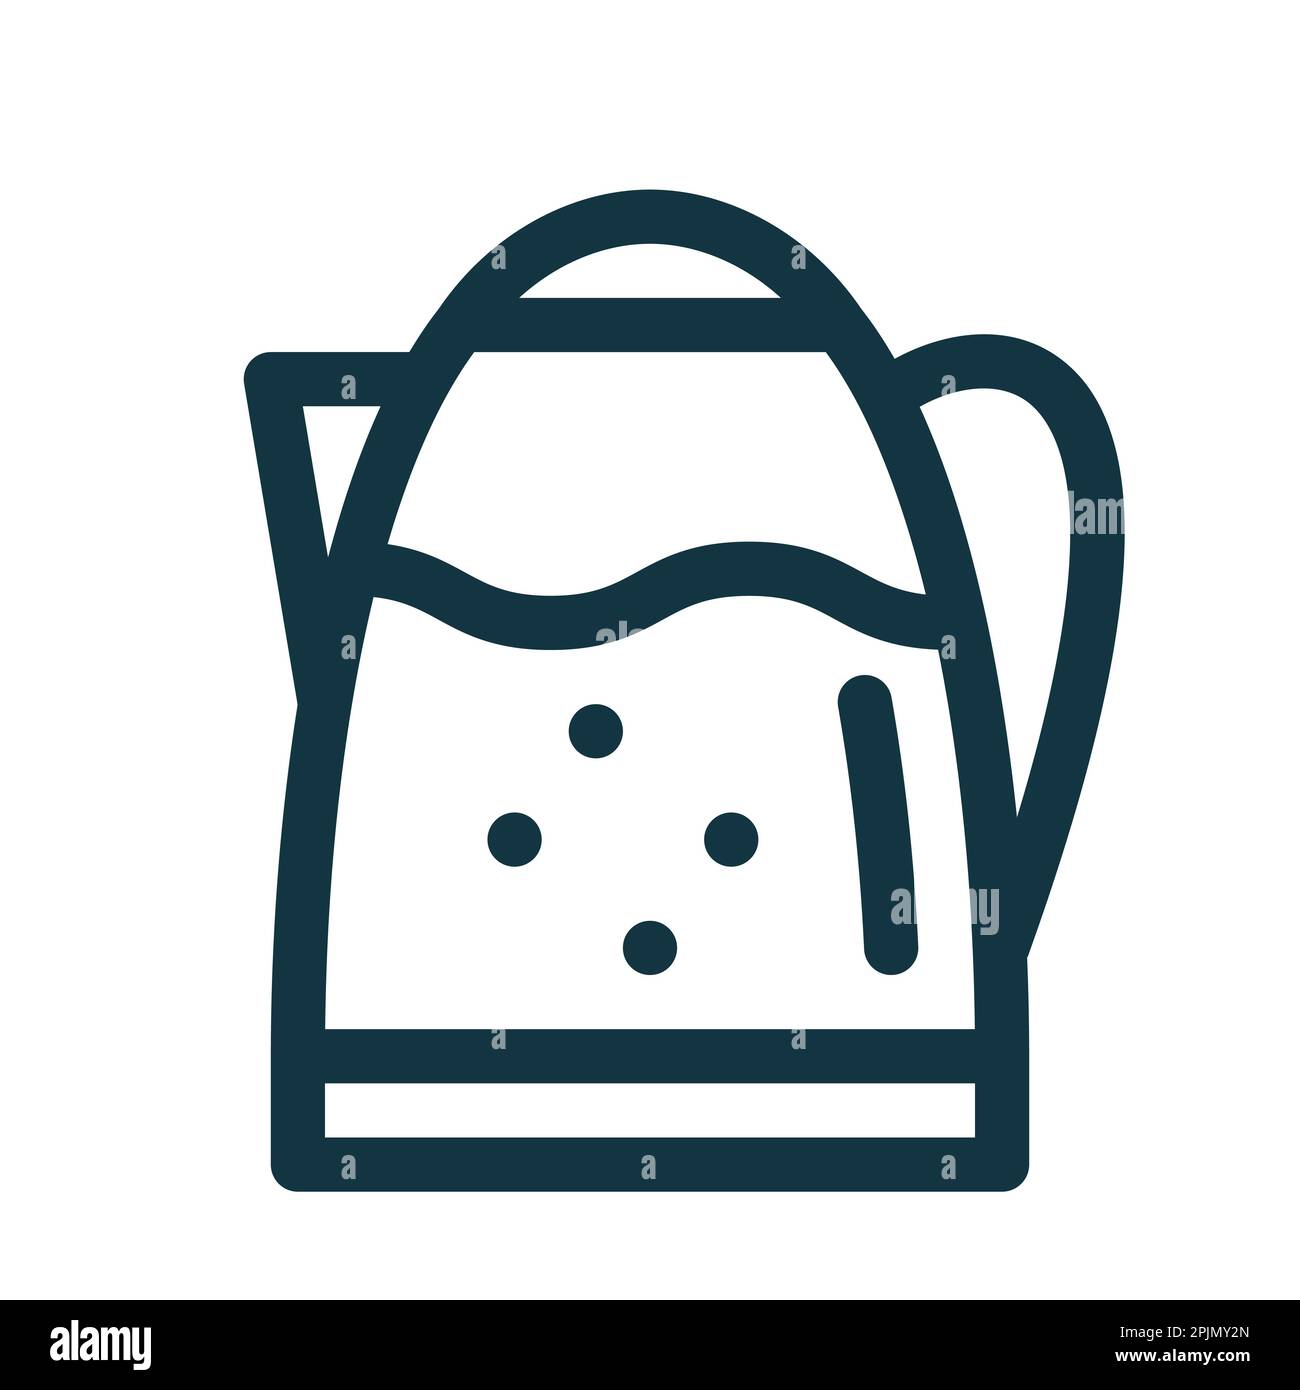 https://c8.alamy.com/comp/2PJMY2N/electric-kettle-with-boiling-water-and-bubbles-applicable-for-tea-brewing-manual-kettle-icon-kitchen-utensil-symbol-vector-illustration-2PJMY2N.jpg